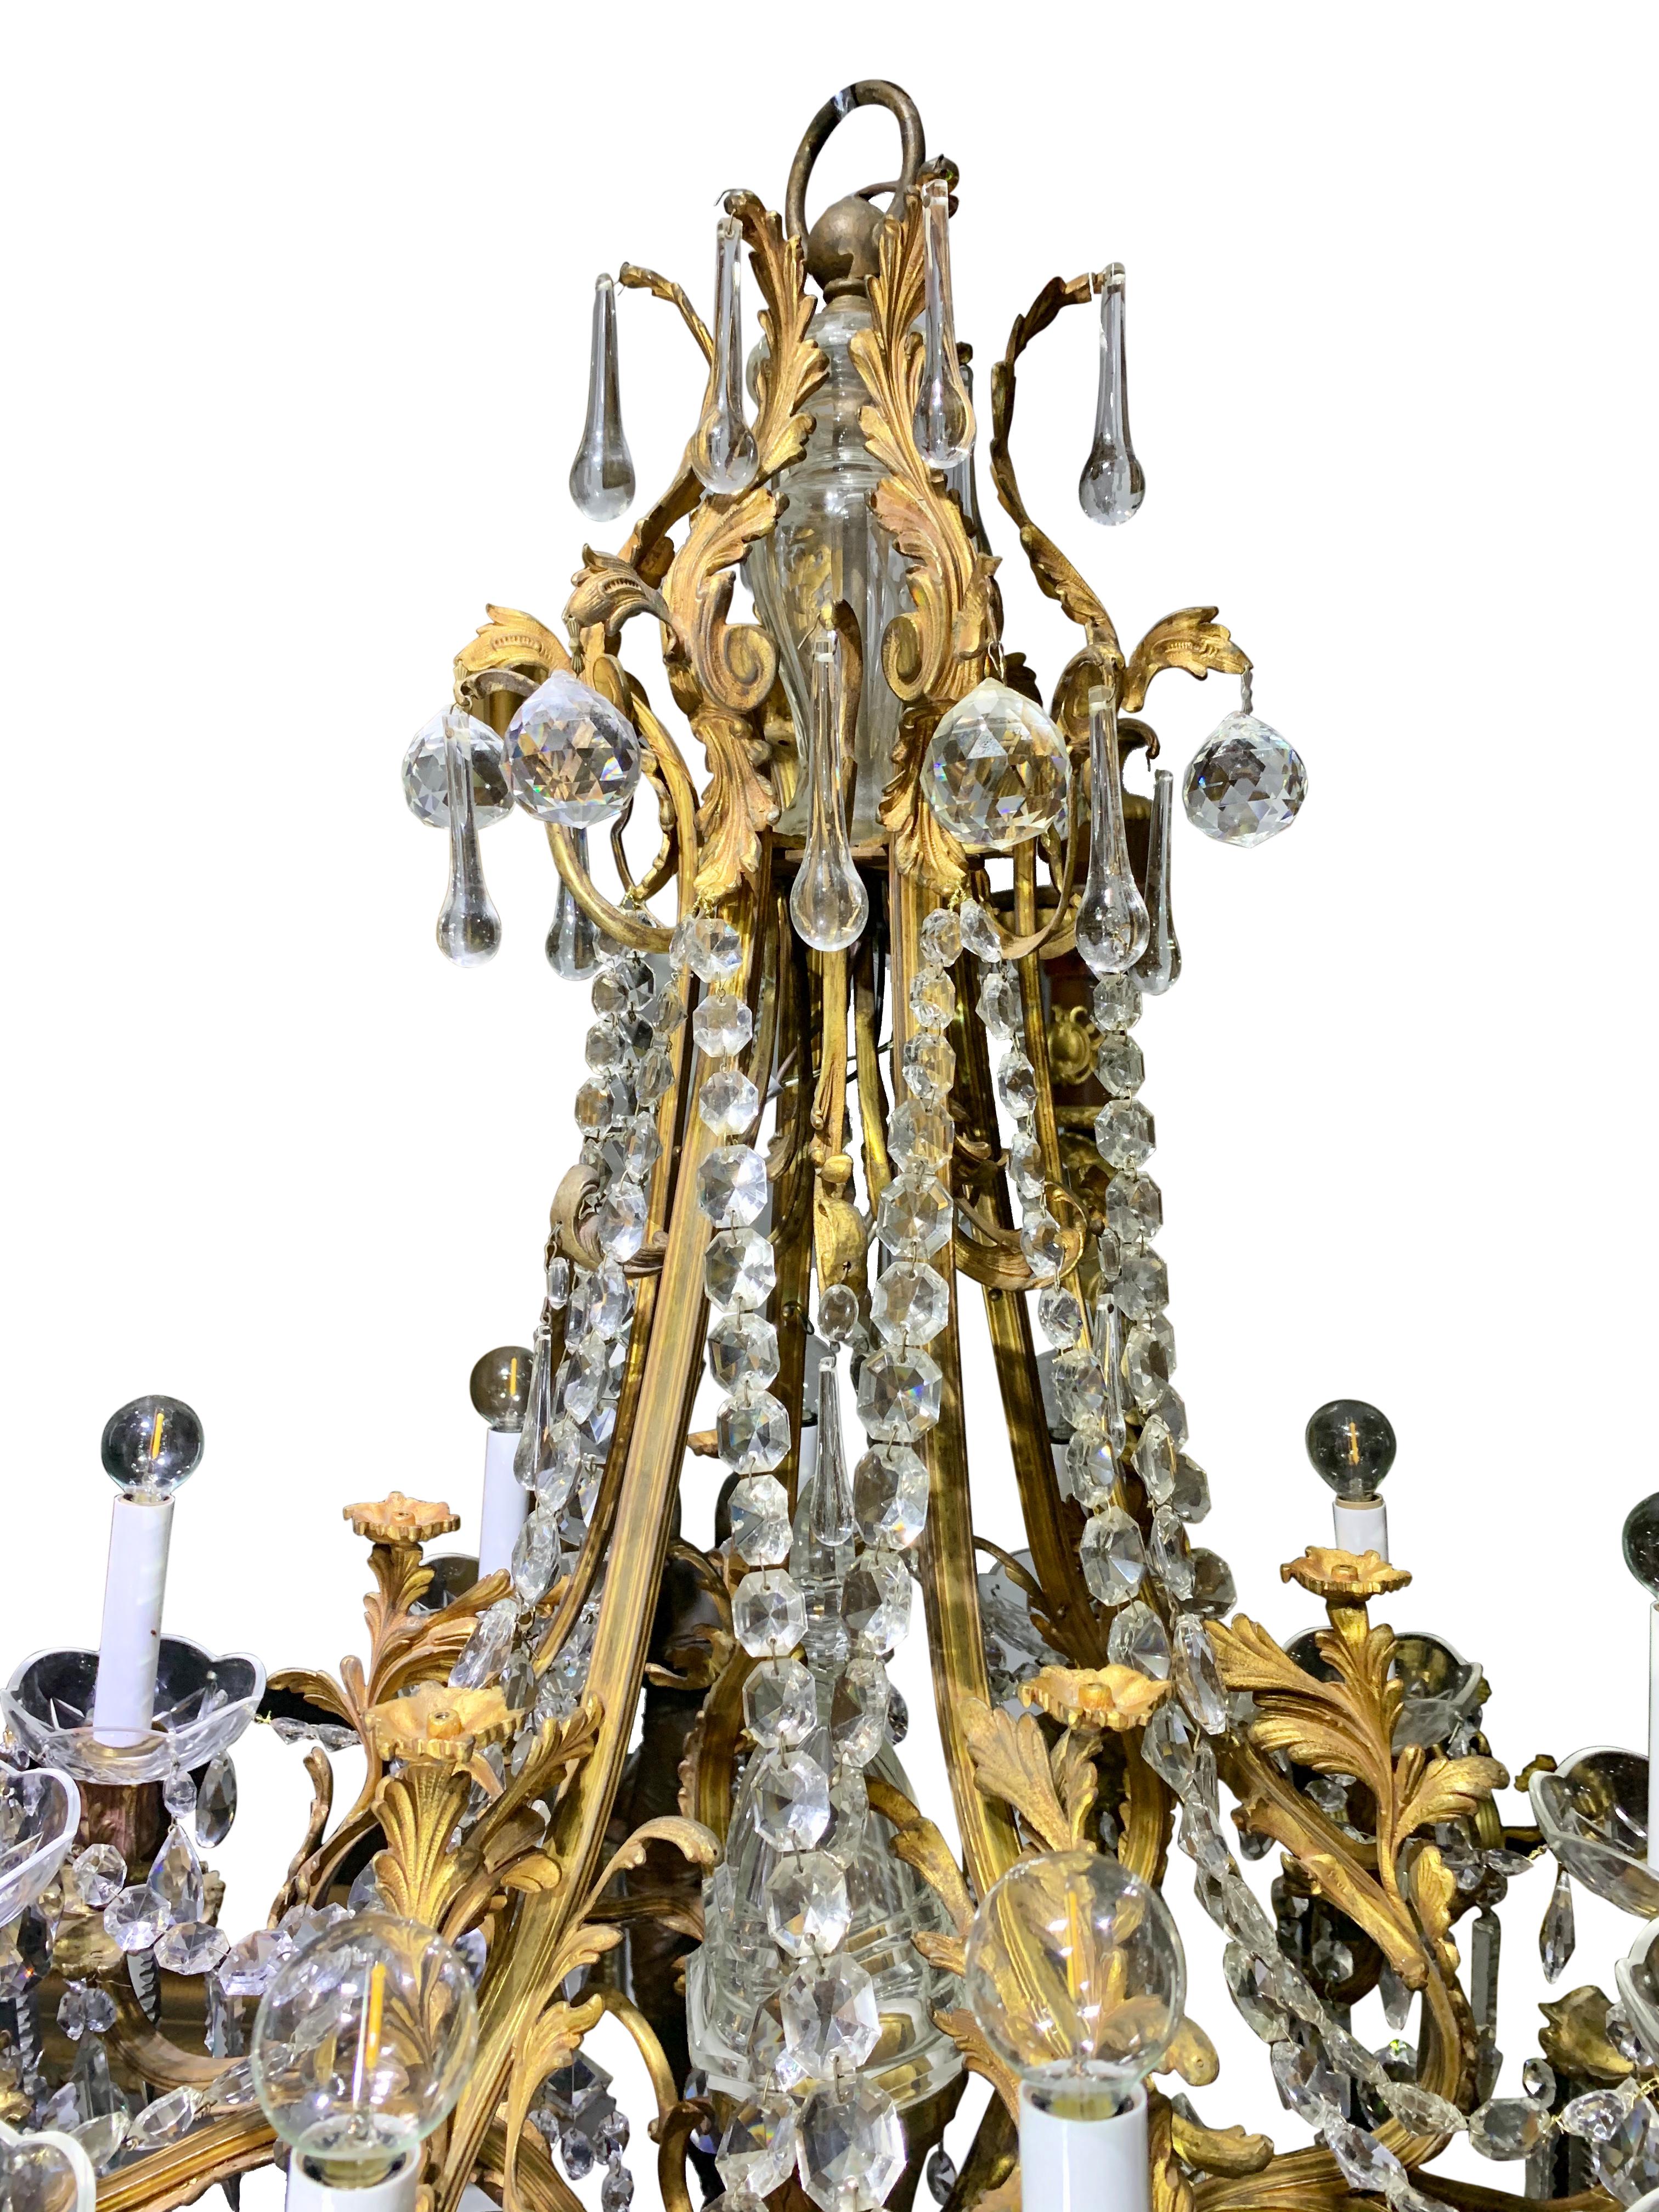 Exceptional 19th century French Louis XVI Marie Antoinette style gilt bronze mounted crystal 12 light chandelier. The chandelier is centered by a beautiful solid cut crystal ball pendant amidst lovely cut crystal pendants and crystal chains. The